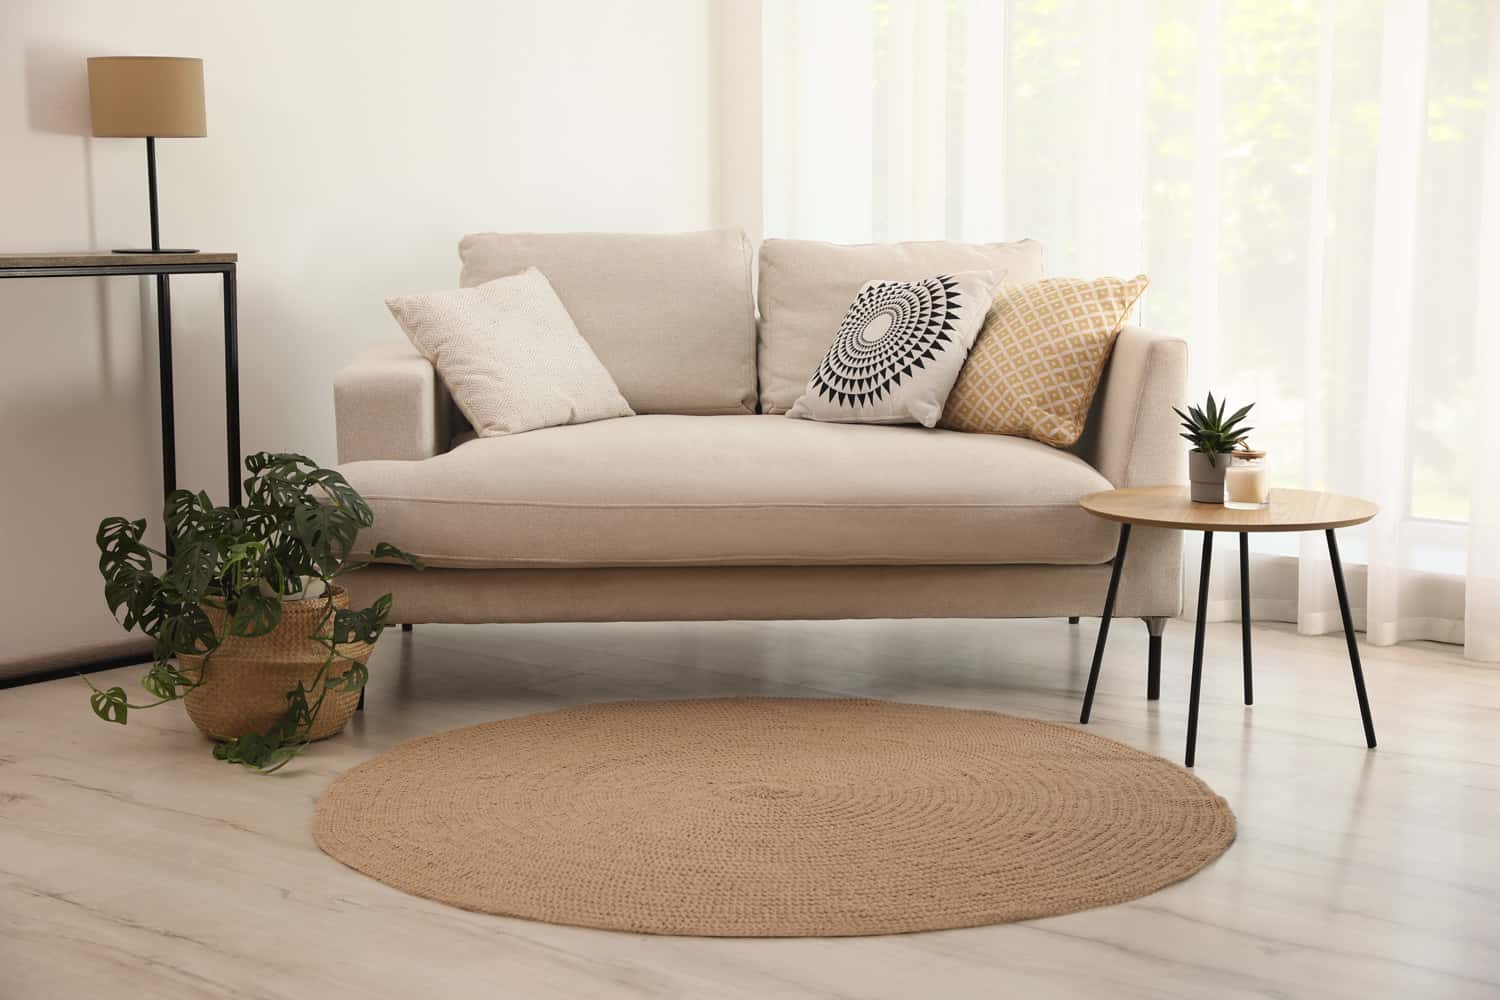 Living room interior with comfortable sofa and stylish round rug - How Big Should A Foyer Rug